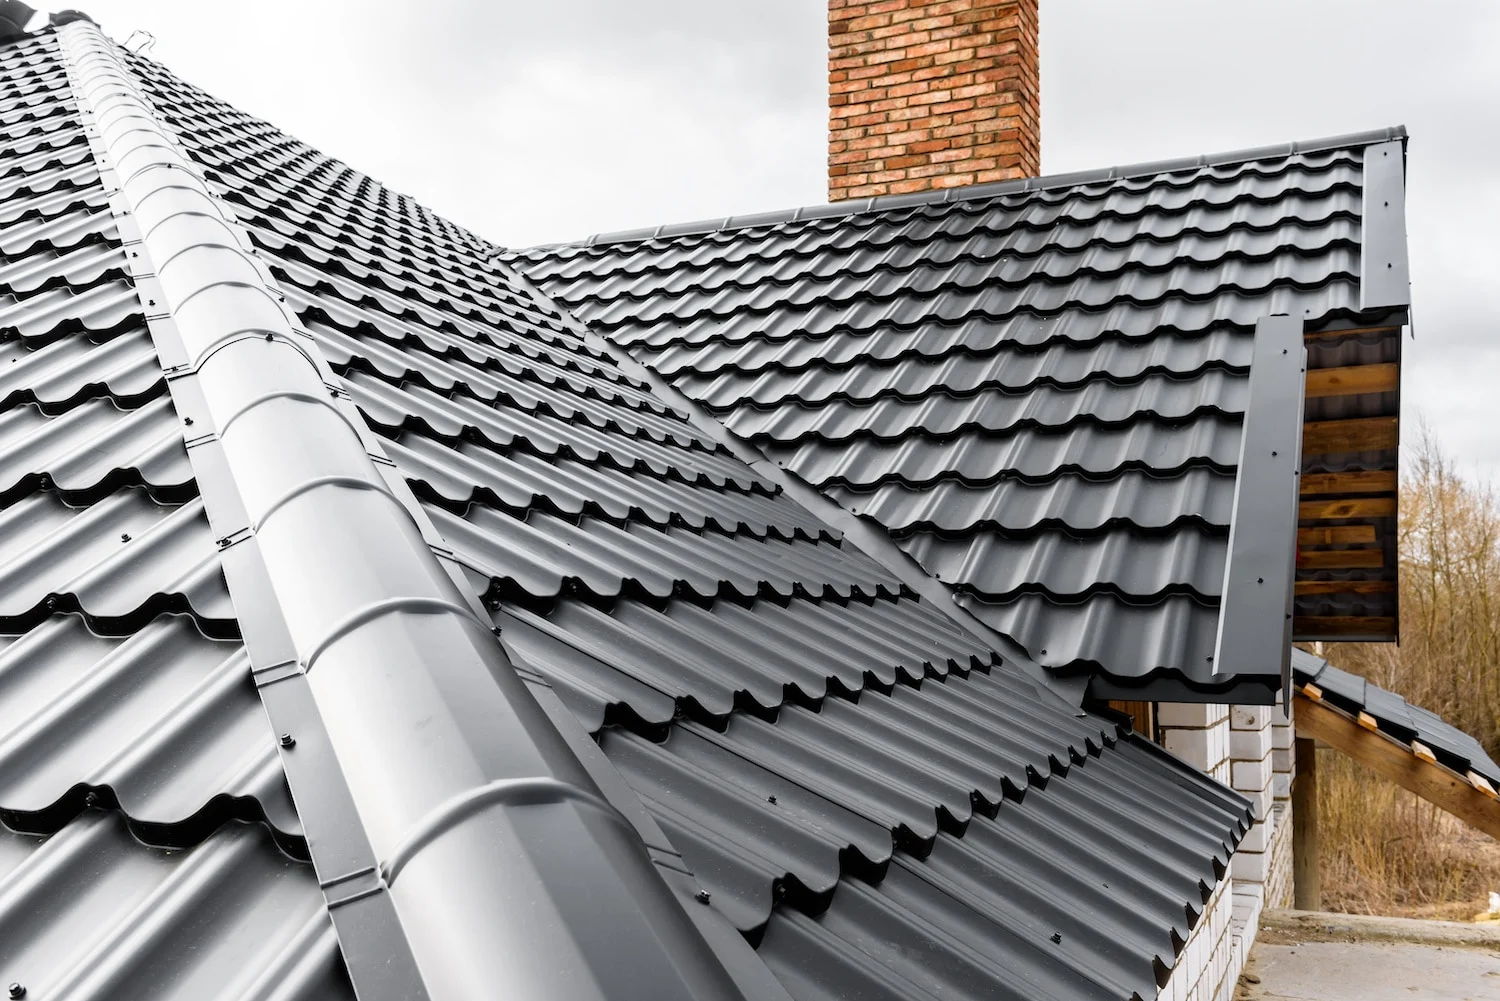 Metal Tile Roof Life Expectancy: Durability Beyond Expectations